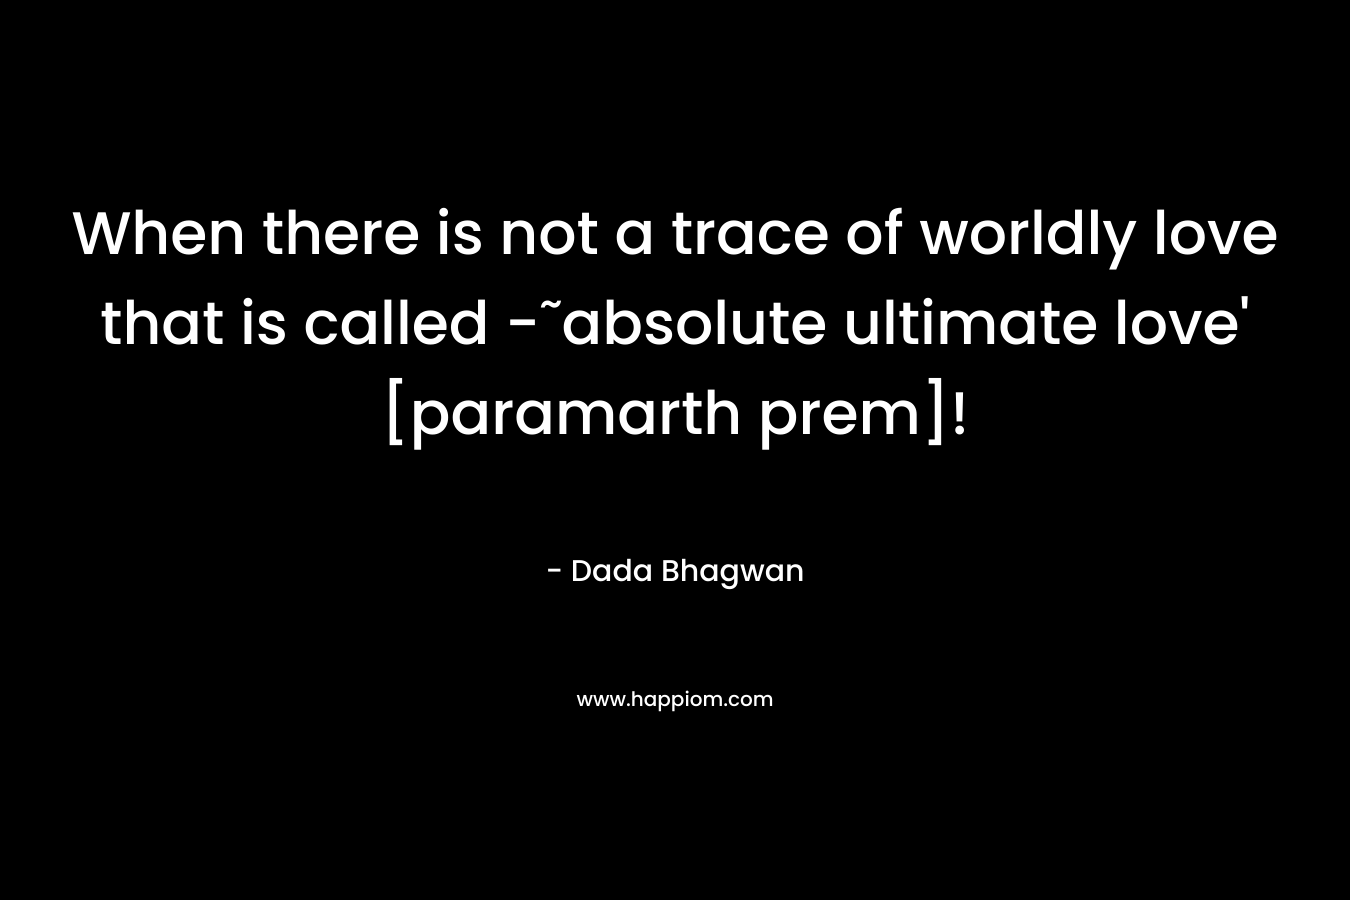 When there is not a trace of worldly love that is called -˜absolute ultimate love’ [paramarth prem]! – Dada Bhagwan